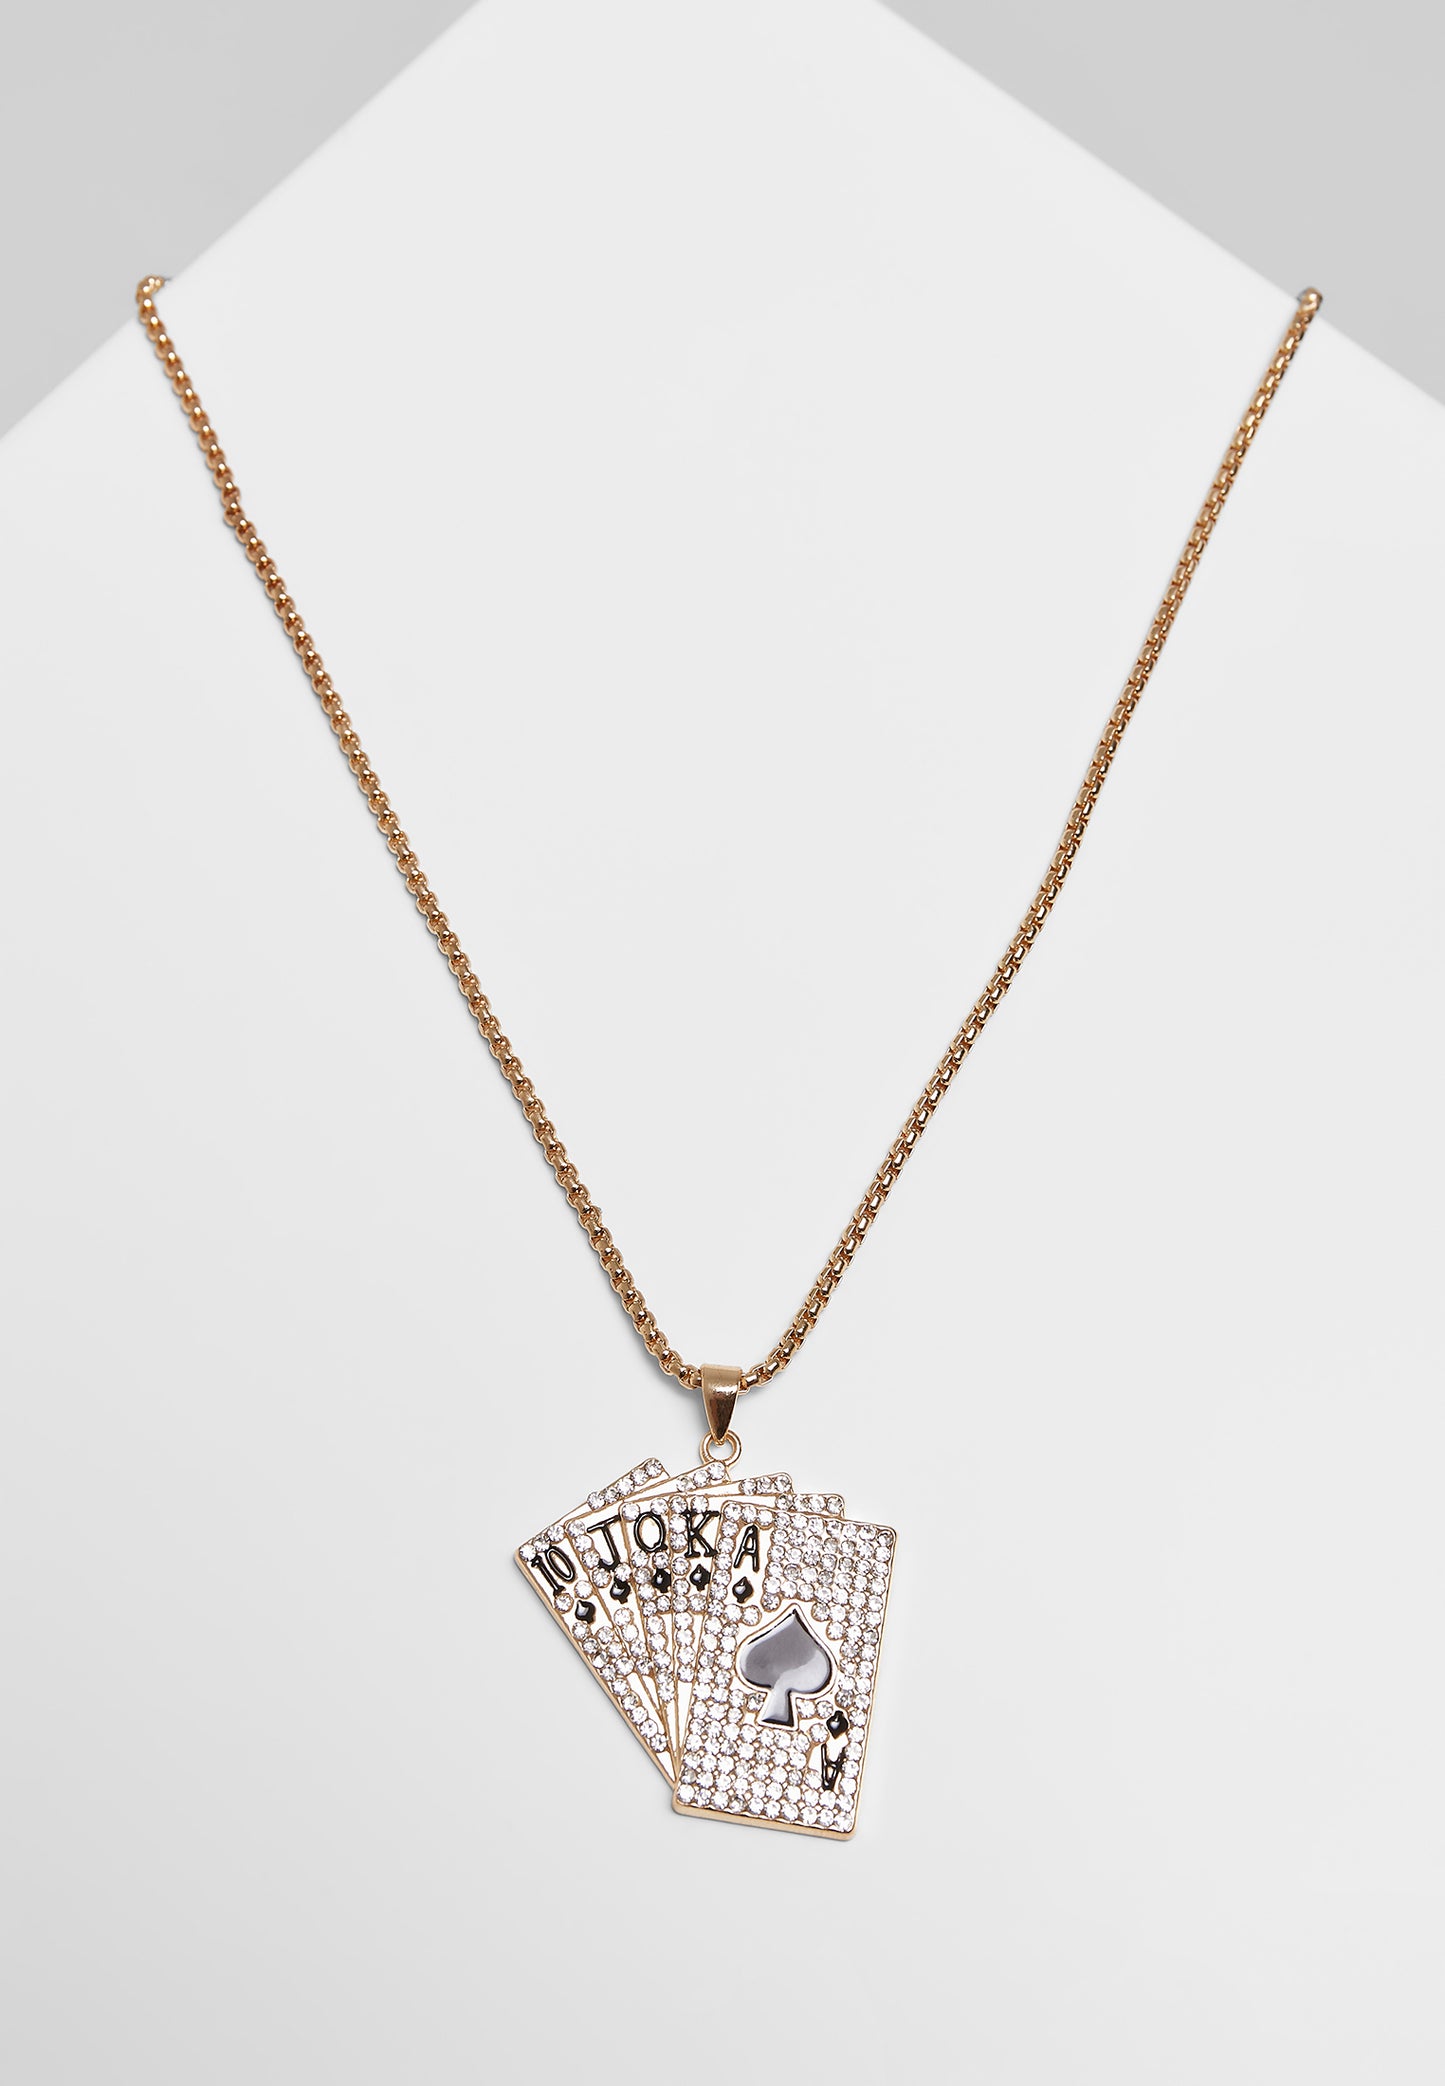 Urban Classics Cards Halskette Iced Out Kette